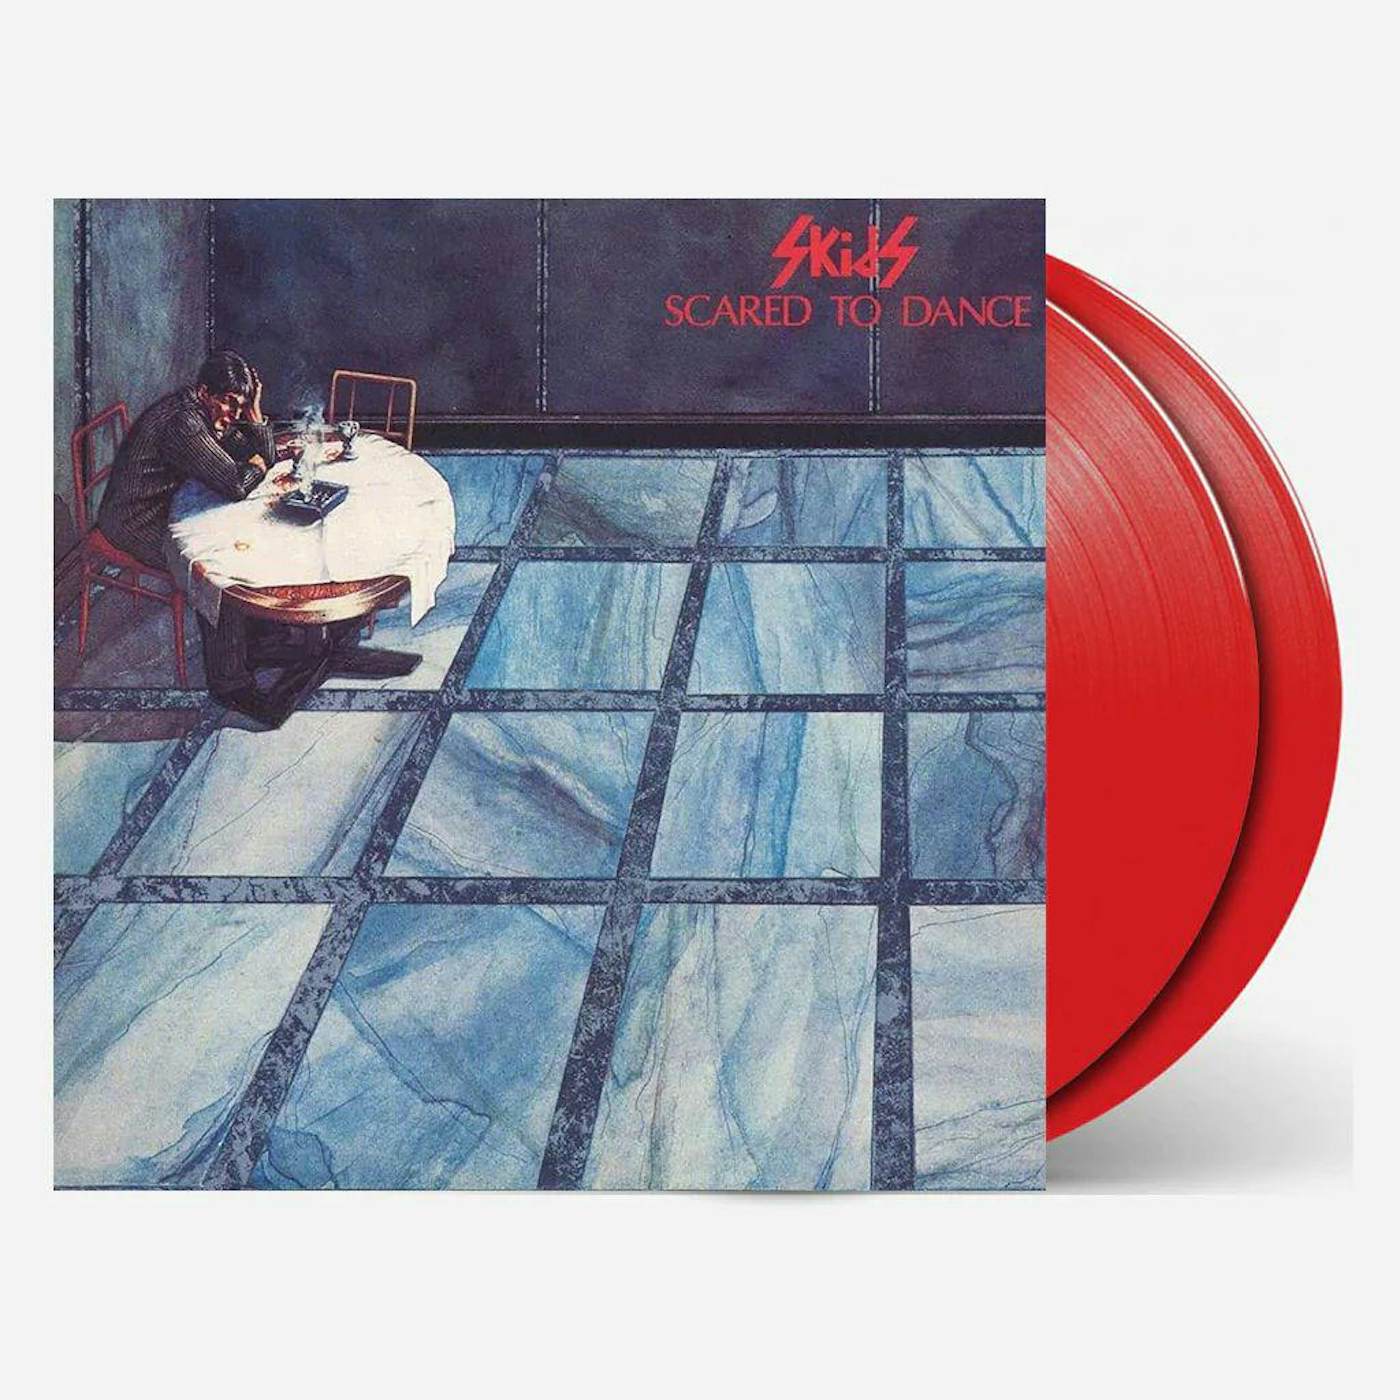 Skids Scared To Dance (Red Vinyl Record/2lp) (I) 